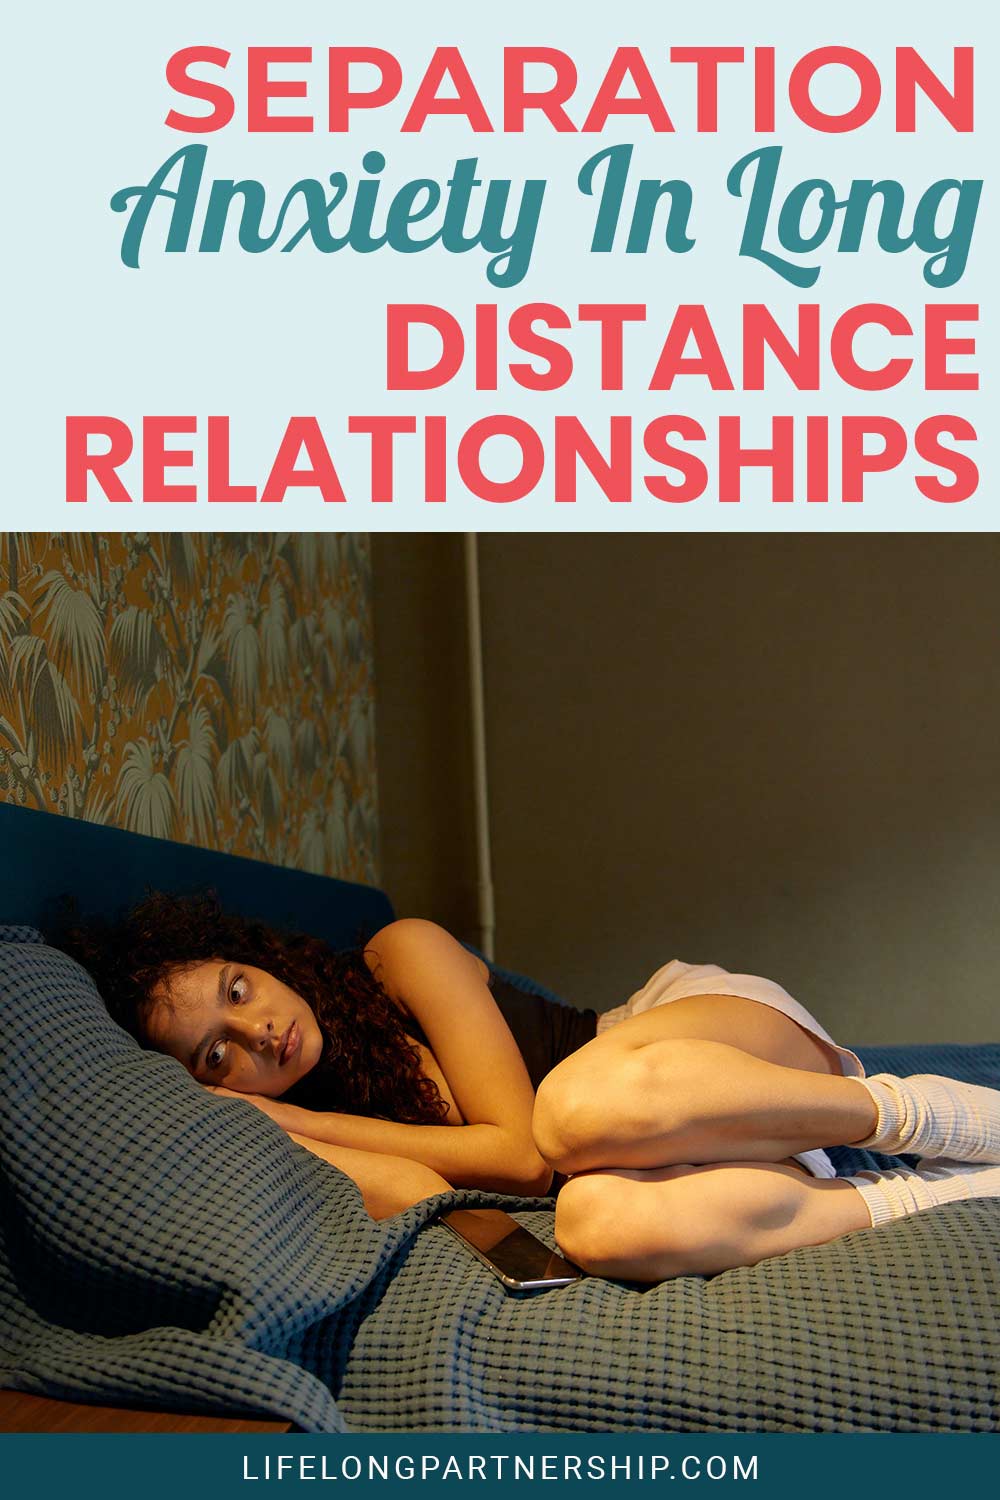 Worried girl lying on a bed - Separation Anxiety In Long Distance Relationships.